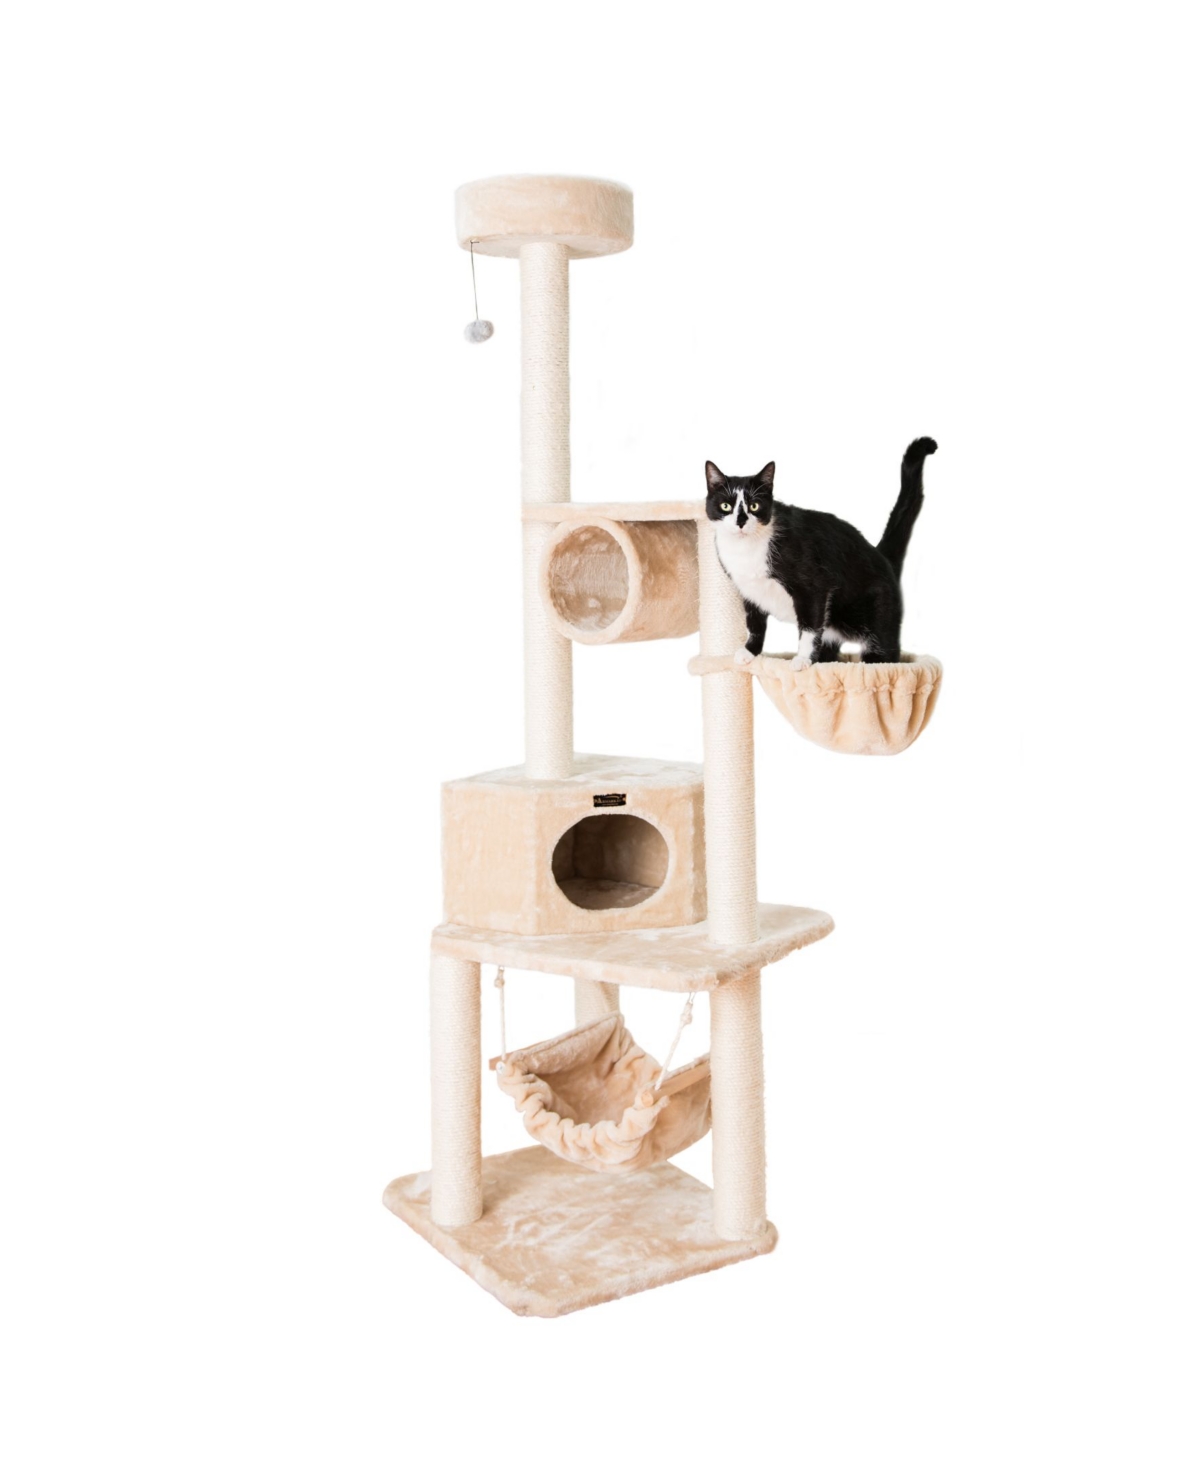 72" H Pet Real Wood Cat Tower With Lounge Basket, Perch - Beige